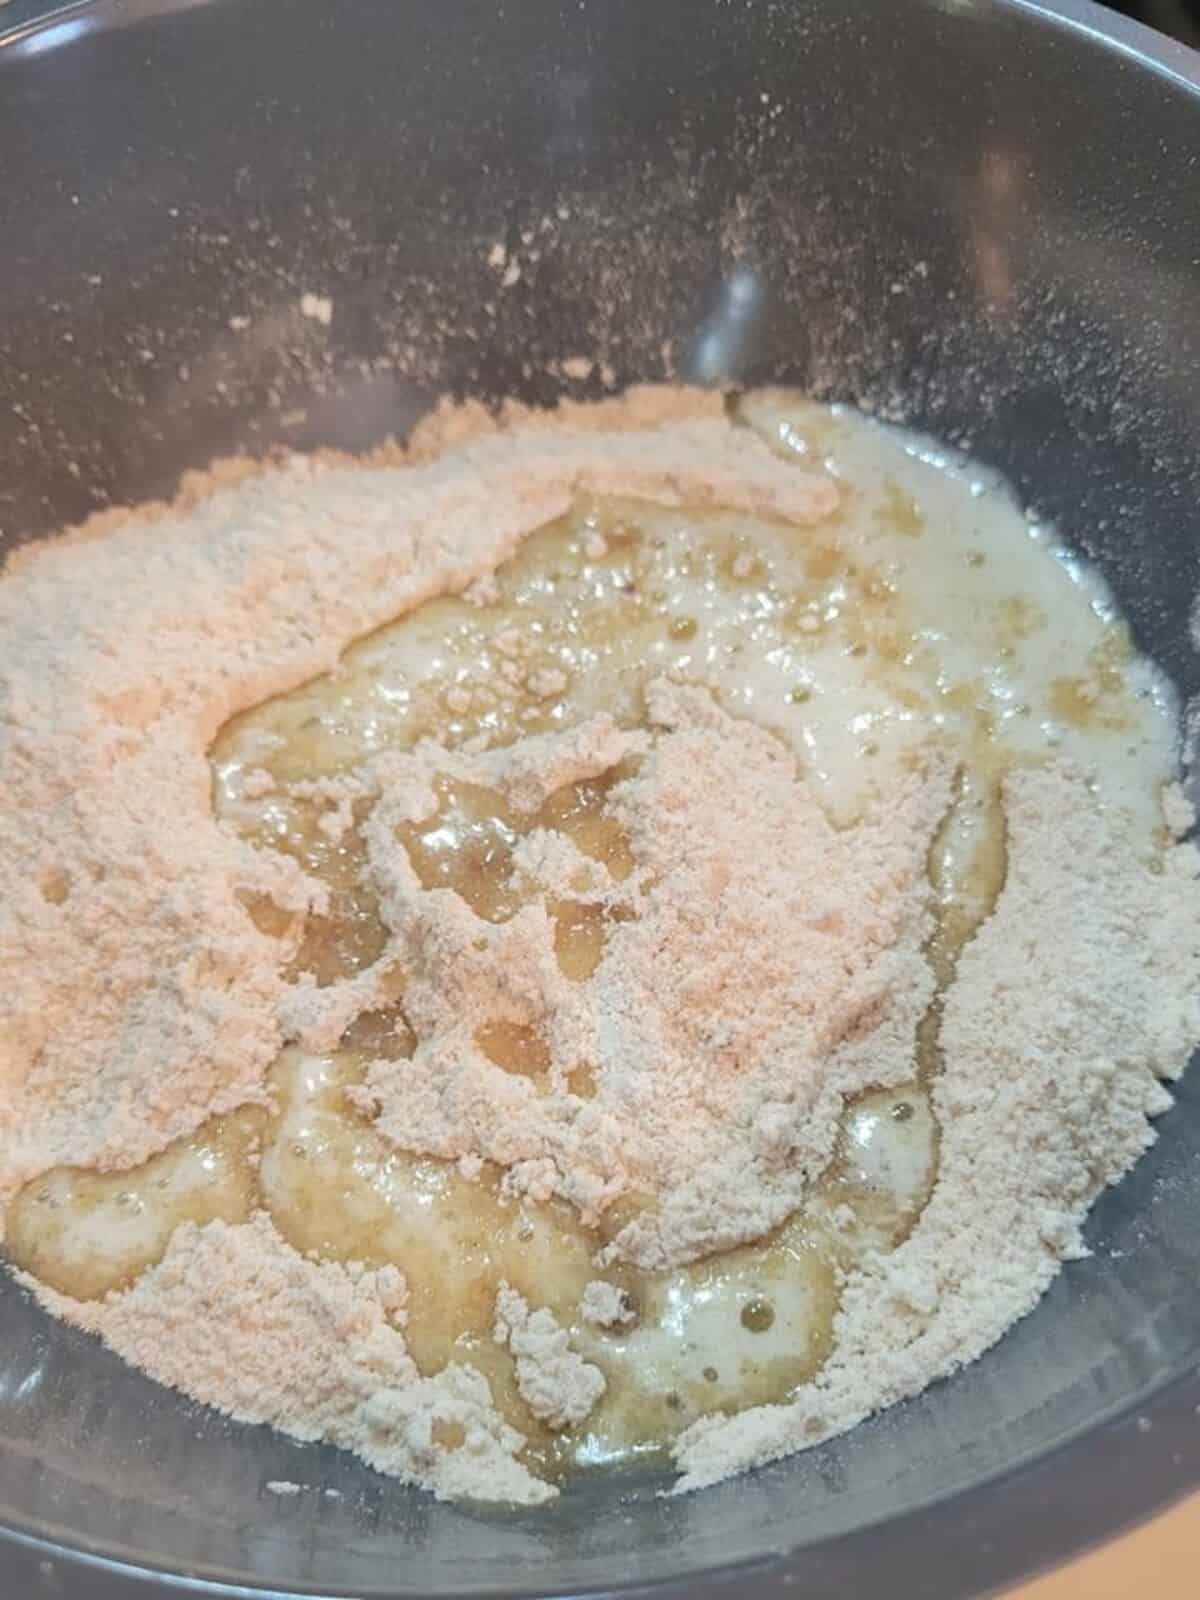 dry crumble ingredients in mixing bowl, melted butter on top